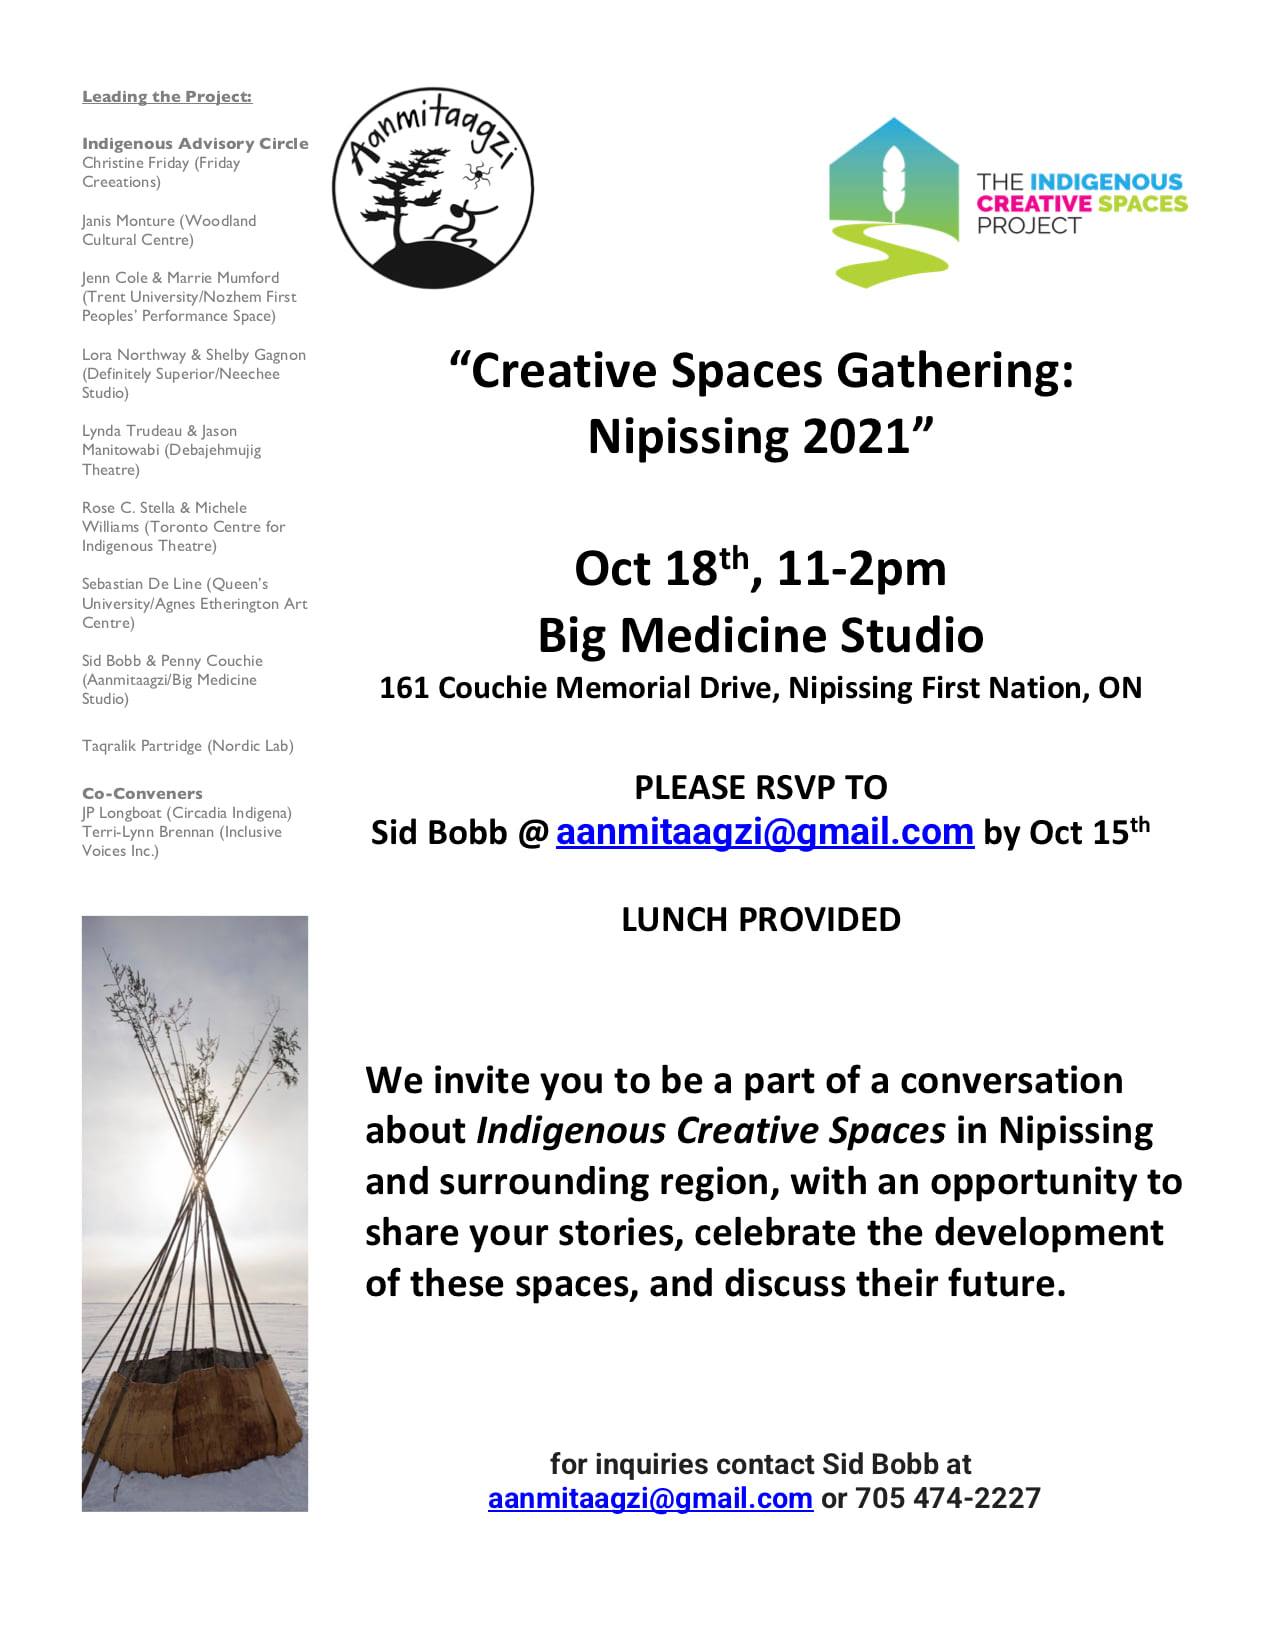 Poster for the "Creative Spaces Gathering: Nipissing 2021". The poster invites the public to be part of a conversation about Indigenous Creative Sapaces in Nipissing and the surrounding region, with an opportunity to share stories, celebrate the development of these spaces, and discuss their future. The event will take place on October 18th from 11 am to 2 pm. Lunch will be provided. To RSVP, please contact Sid Bobb at aanmitaagzi@gmail.com or call (705) 474-2227.